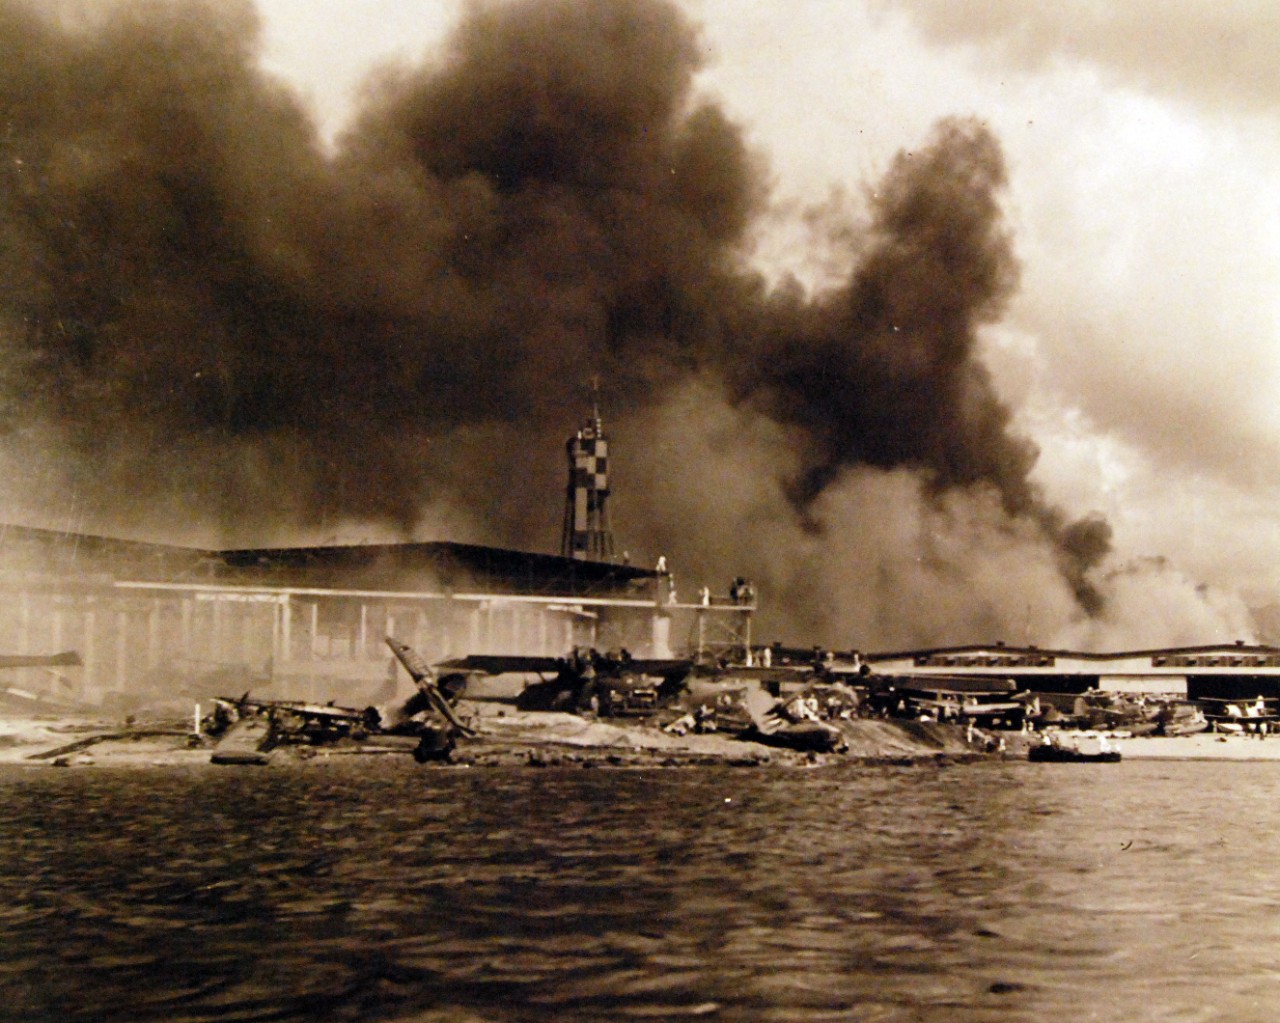 80-G-32744:   Japanese Attack on Pearl Harbor, December 7, 1941.    Damaged planes are shown after the attack. Official U.S. Navy photograph, now in the collections of the National Archives.  (9/9/2015).